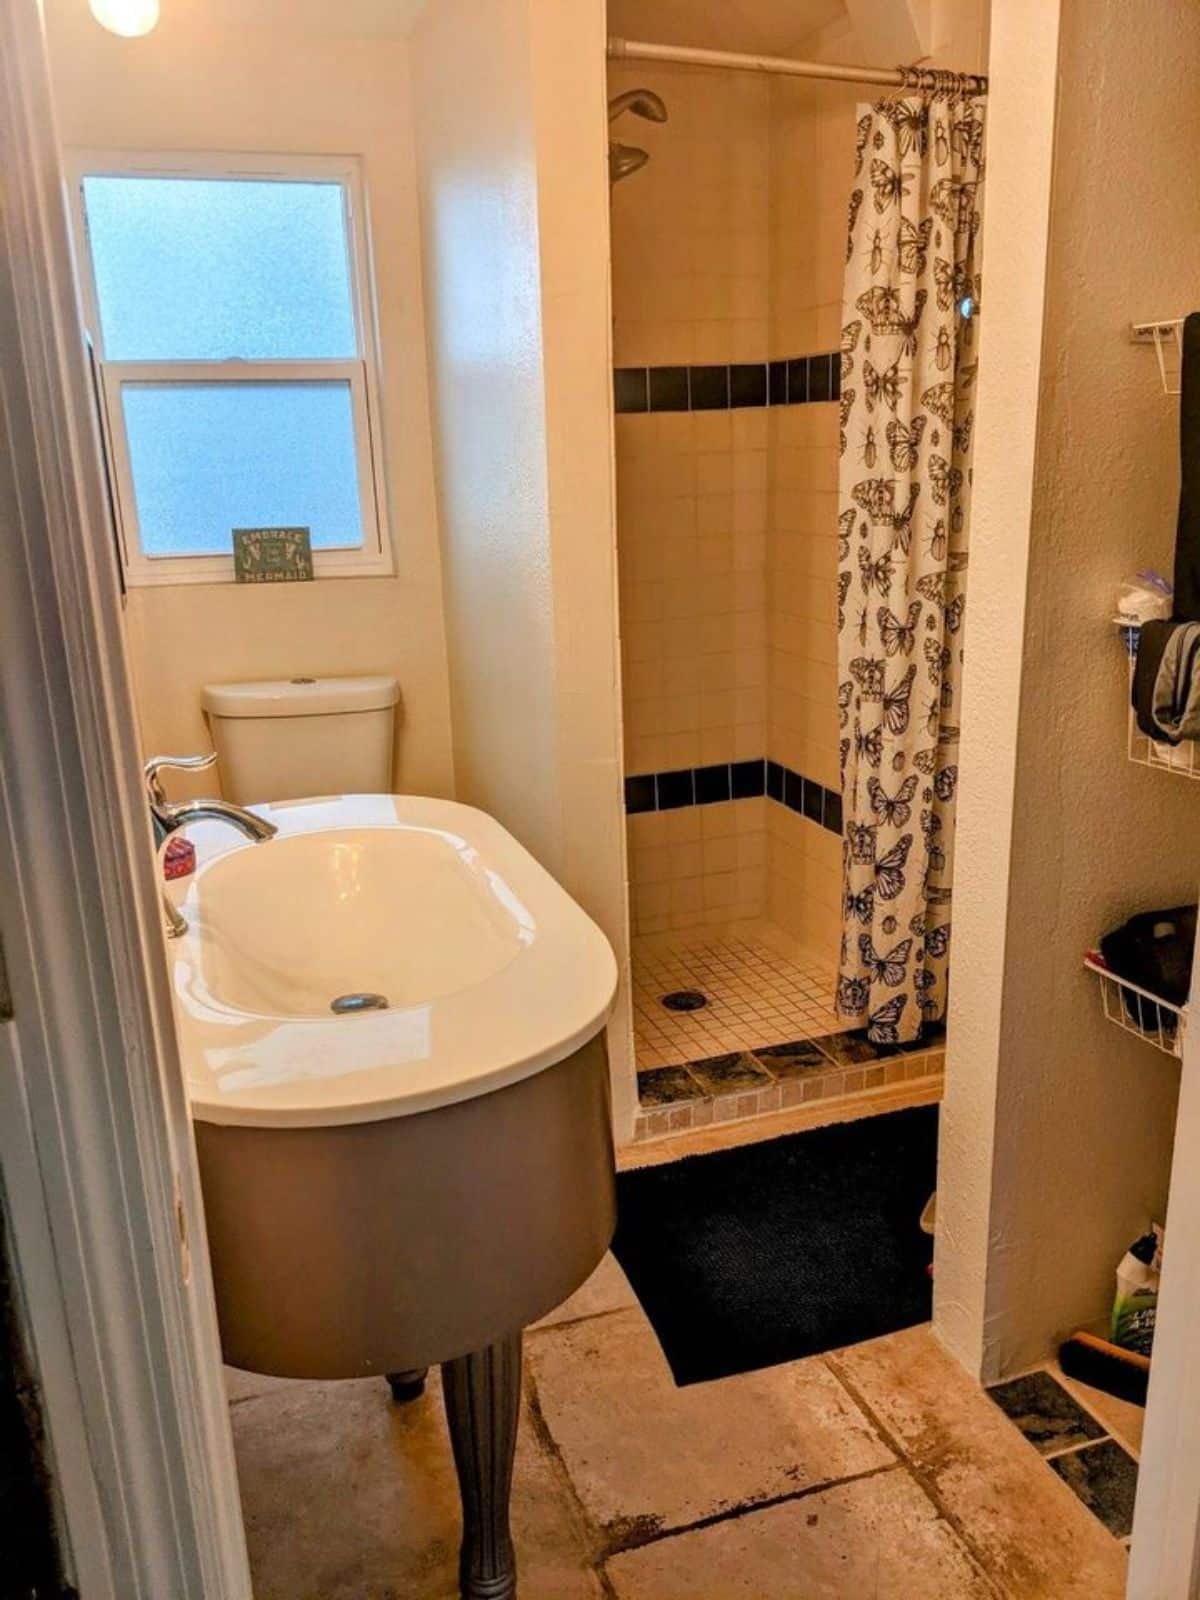 Bathroom has a sink, storage racks and separate shower area